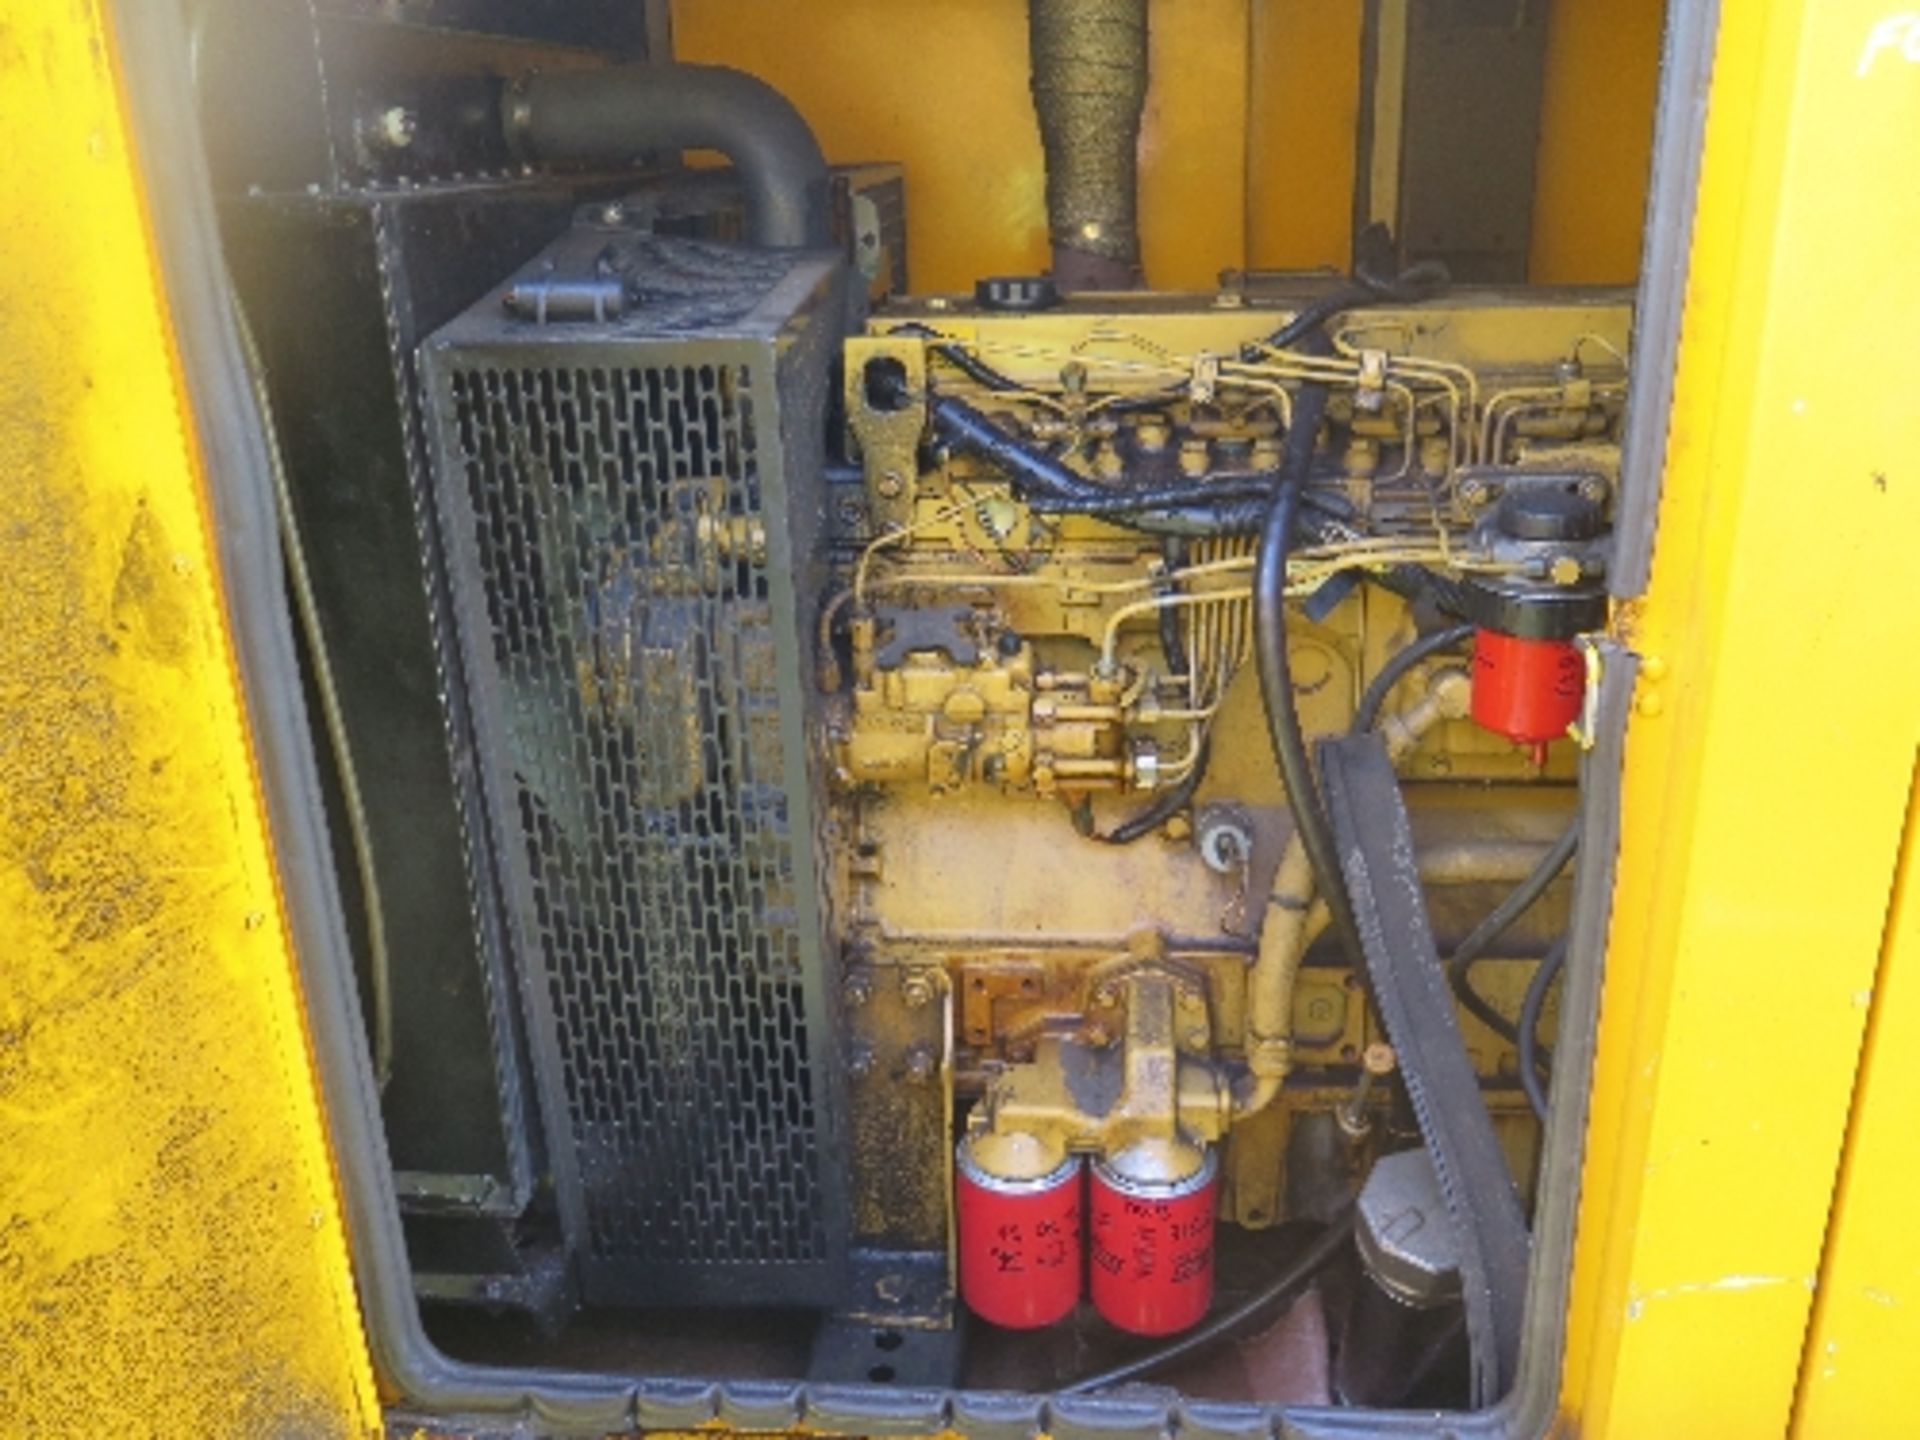 Caterpillar XQE100 generator 30132 hrs 138851
PERKINS - RUNS AND MAKES POWER
ALL LOTS are SOLD - Image 3 of 6